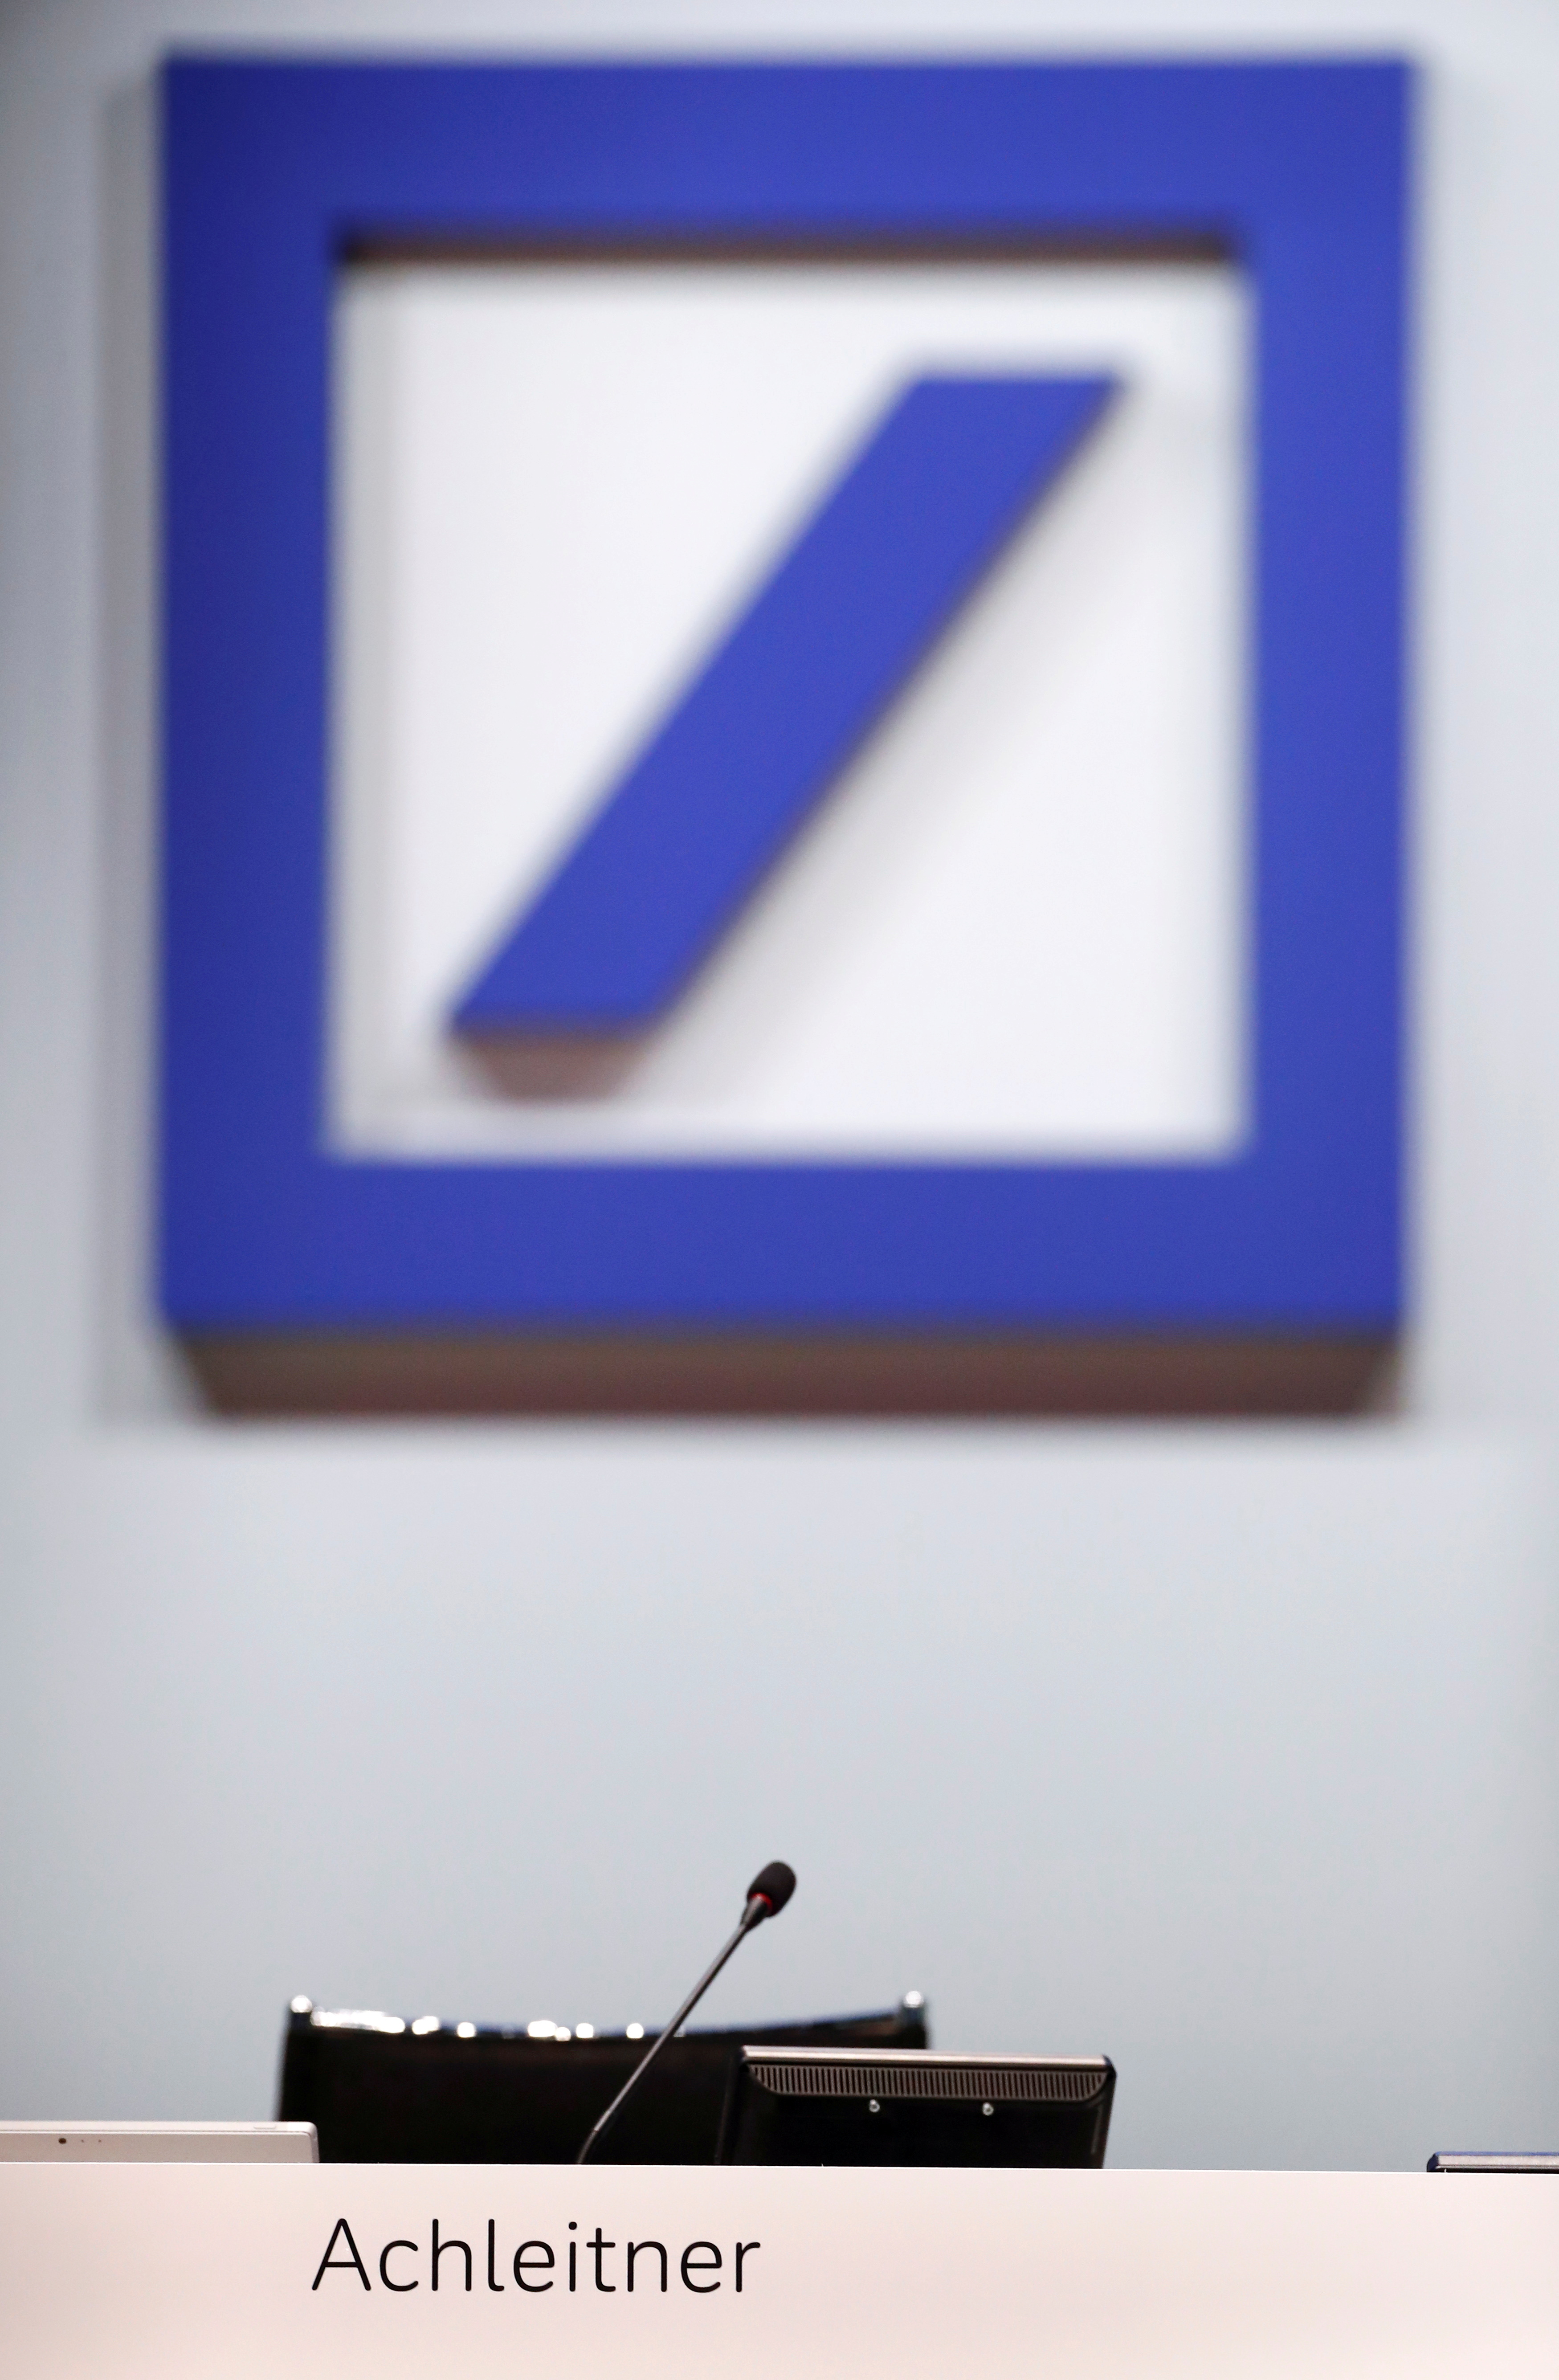 The logo of Deutsche Bank is on display during the bank's annual shareholder meeting in Frankfurt